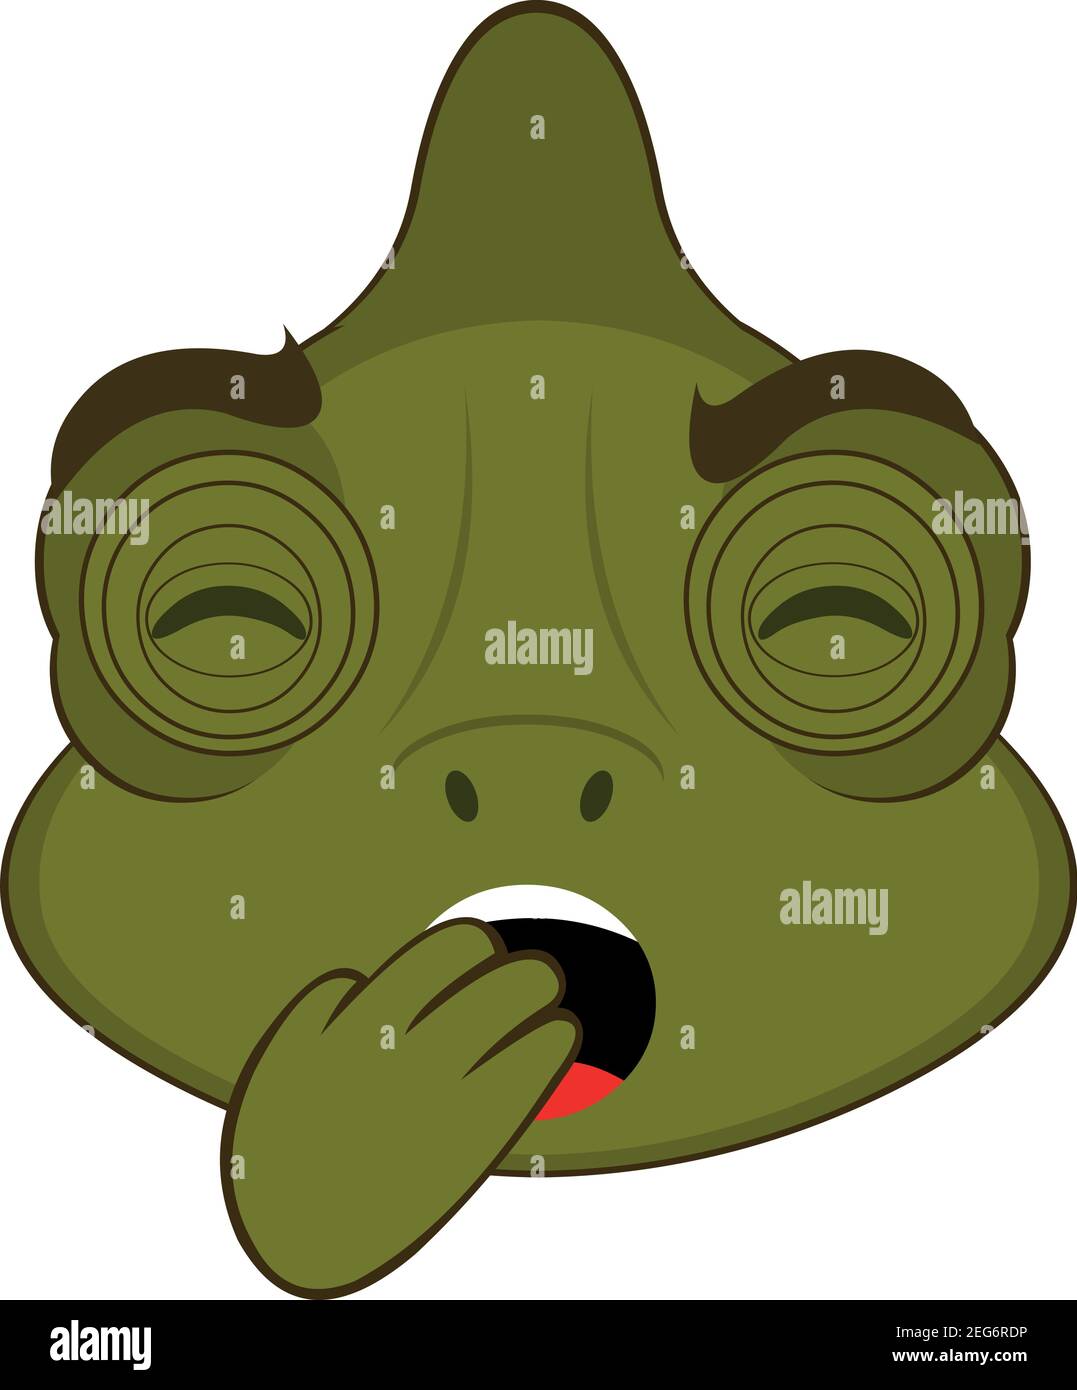 Vector emoticon illustration cartoon of a chameleon´s head with a tired expression, yawning, covering his mouth with his hand Stock Vector